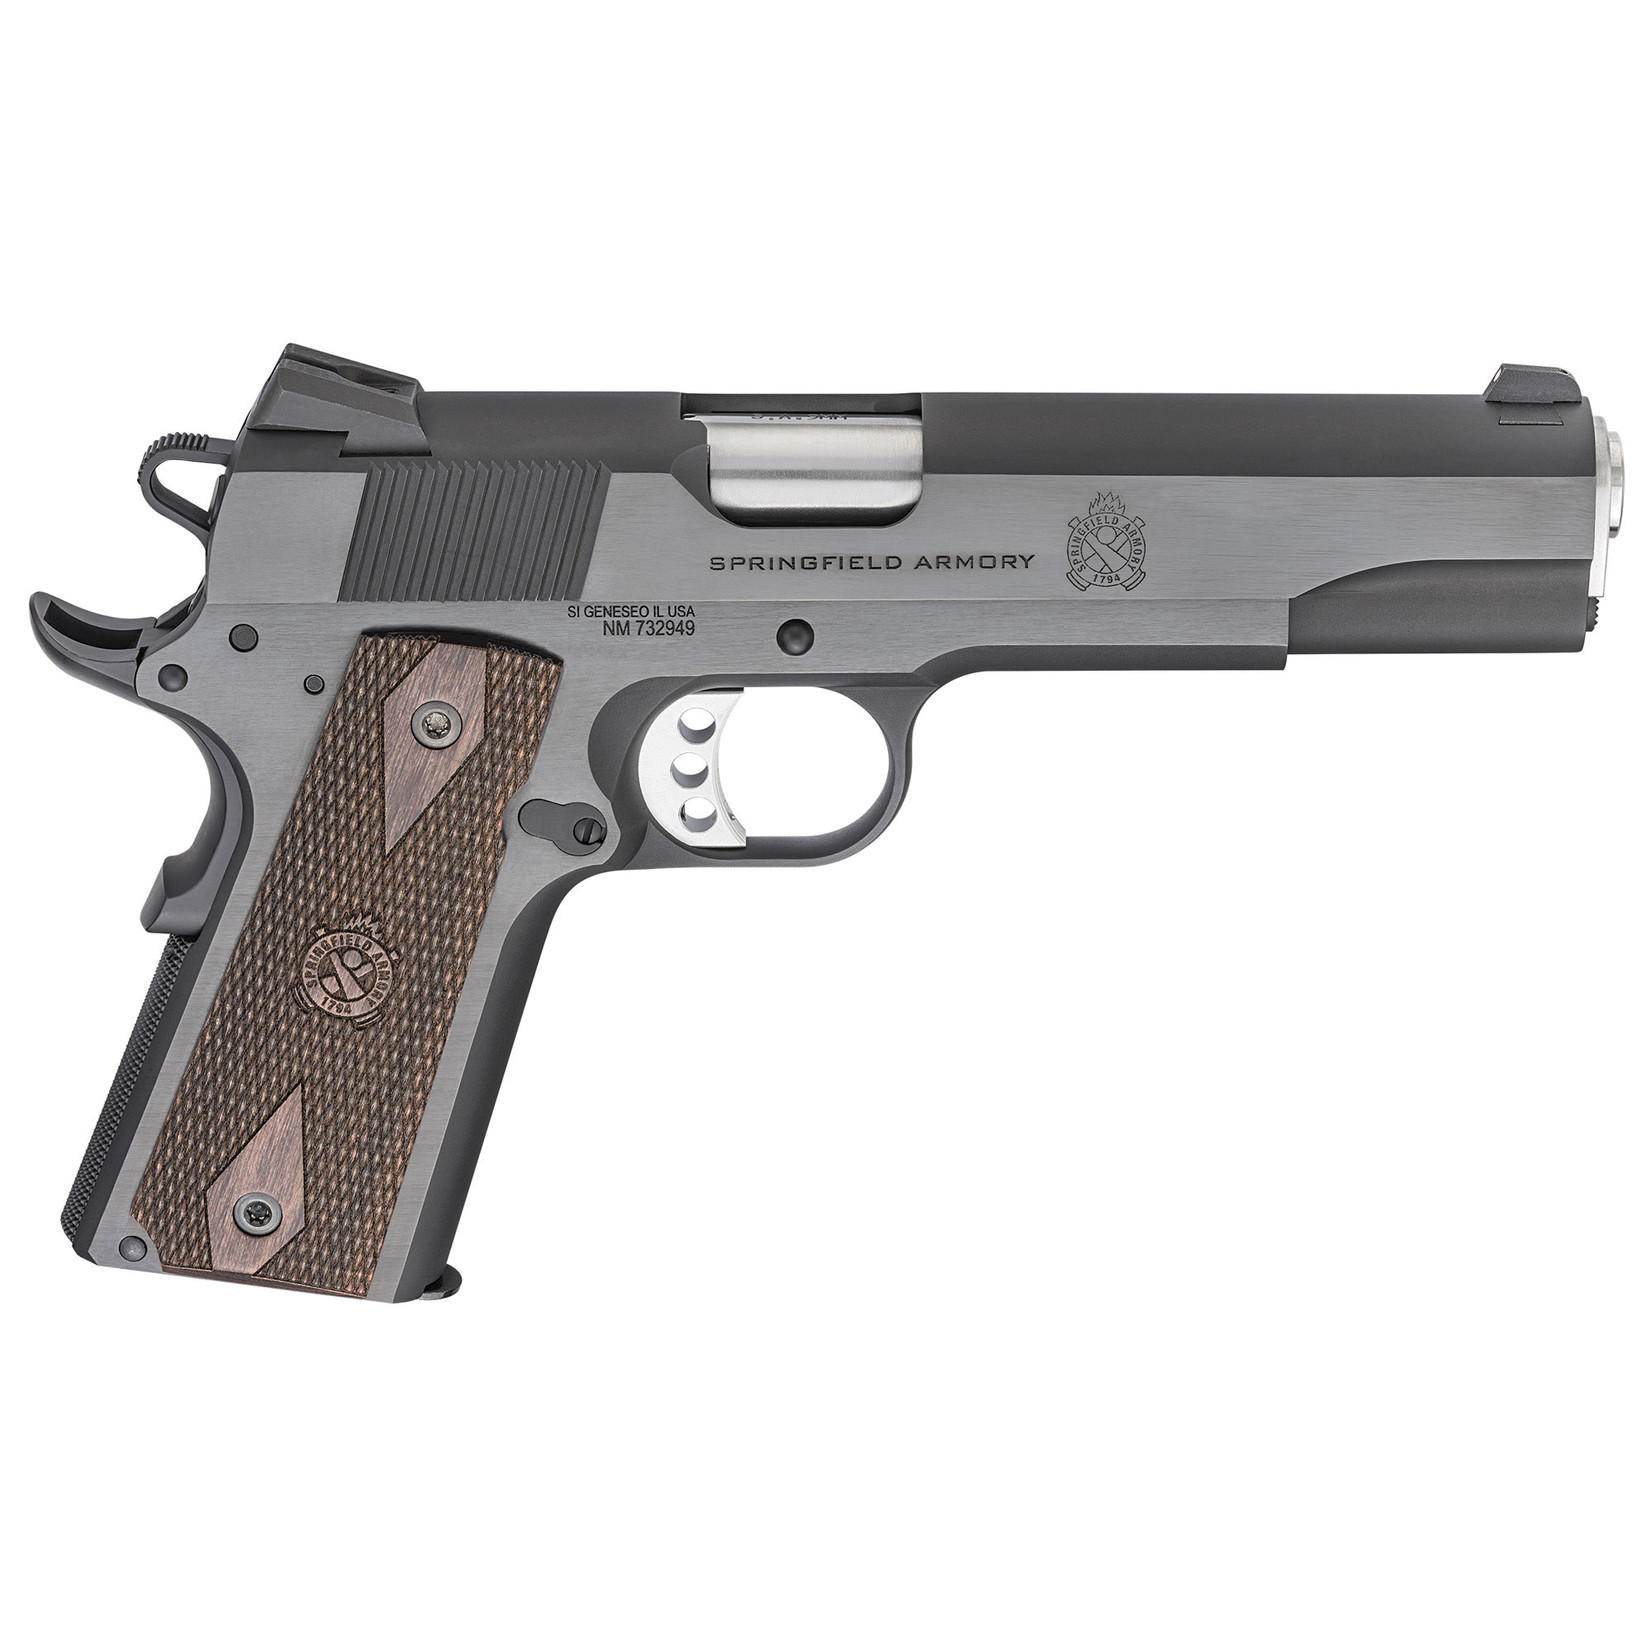 SPRINGFIELD ARMORY SPRINGFIELD ARMORY GARRISON 1911 9MM 9RD 5" BBL